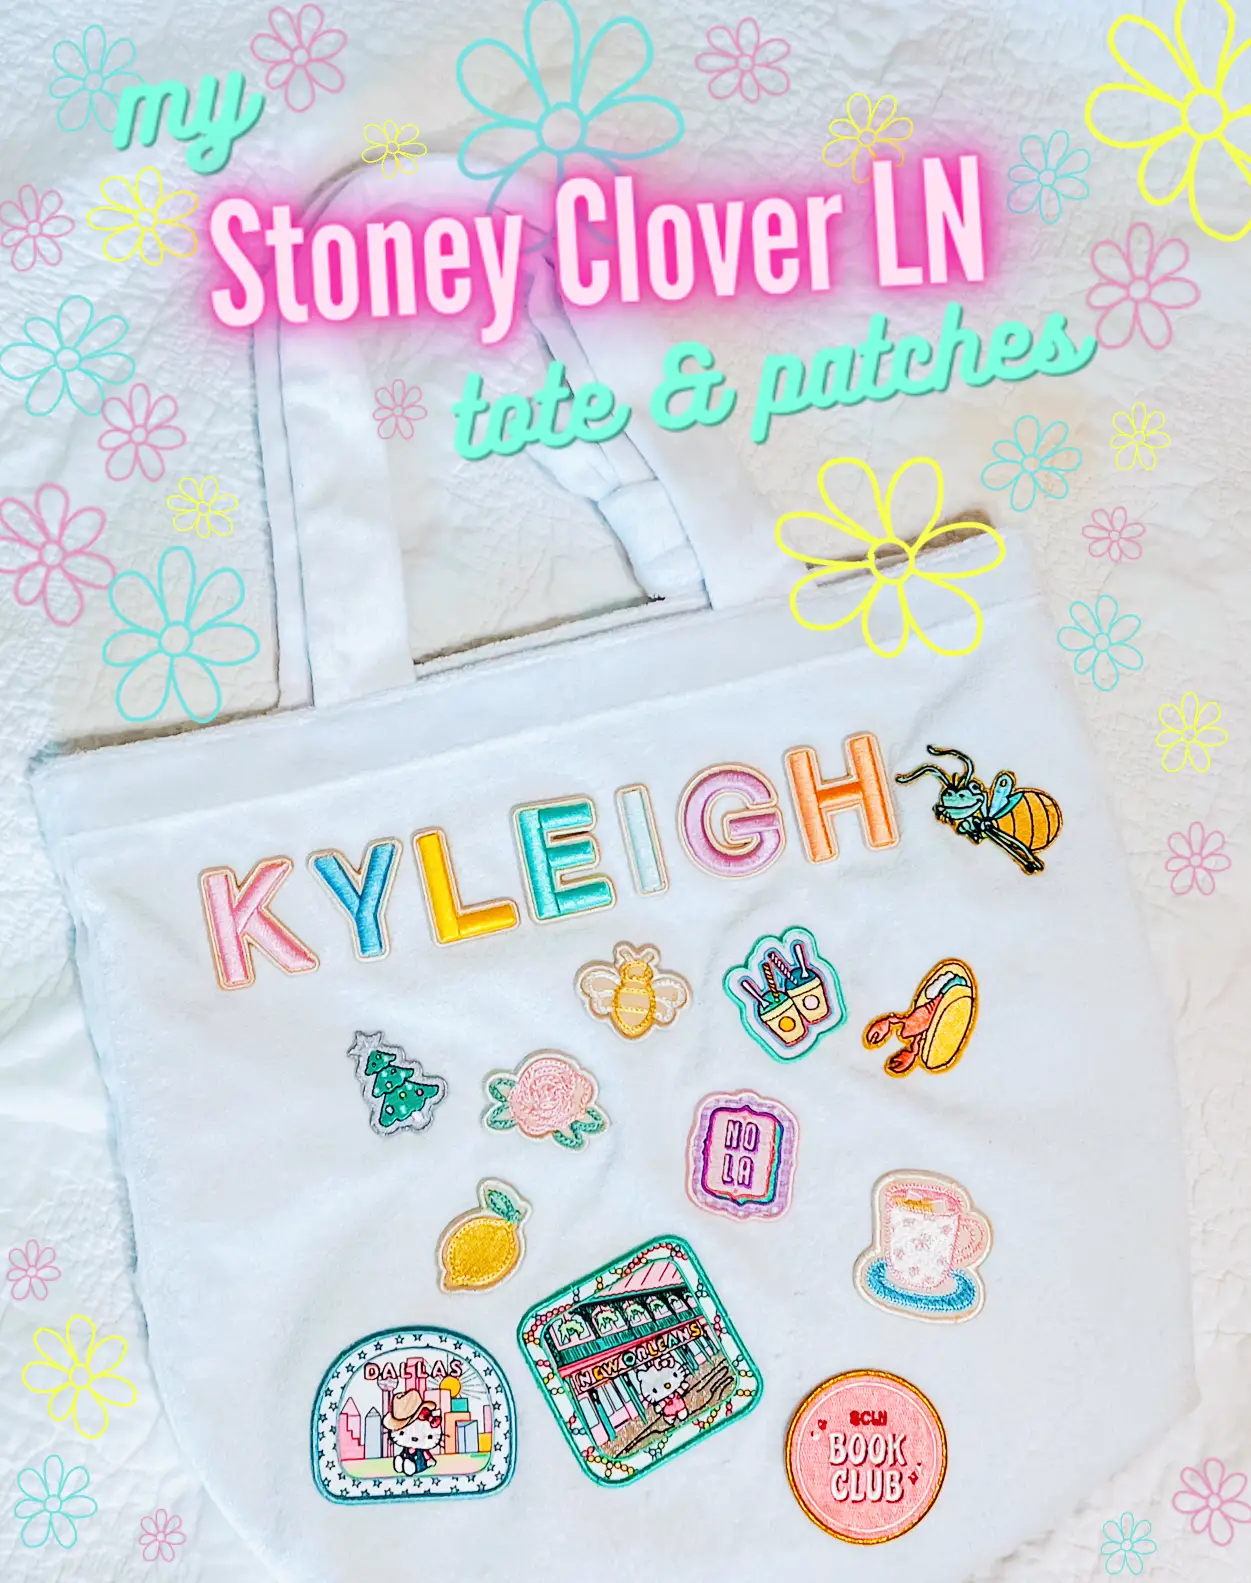 Stoney Clover Ln. tote for summer🌸🍋